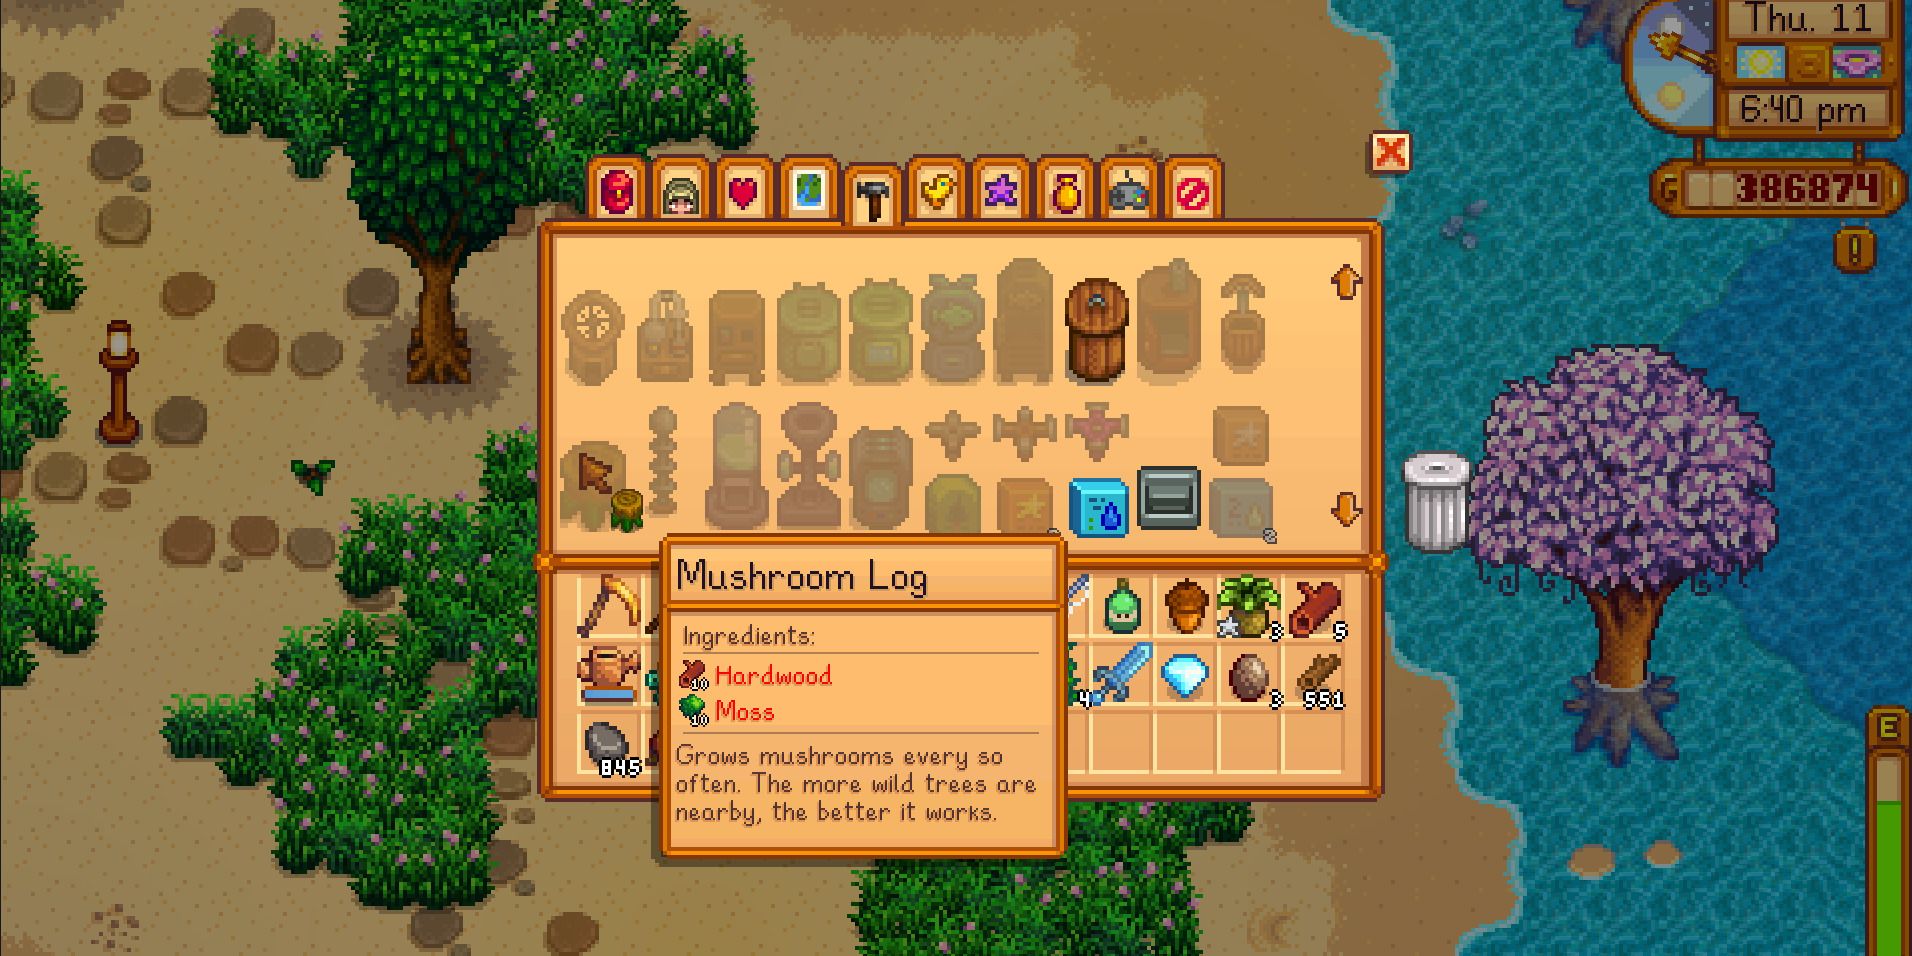 Image of the required ingredients to make a mushroom log in Stardew Valley